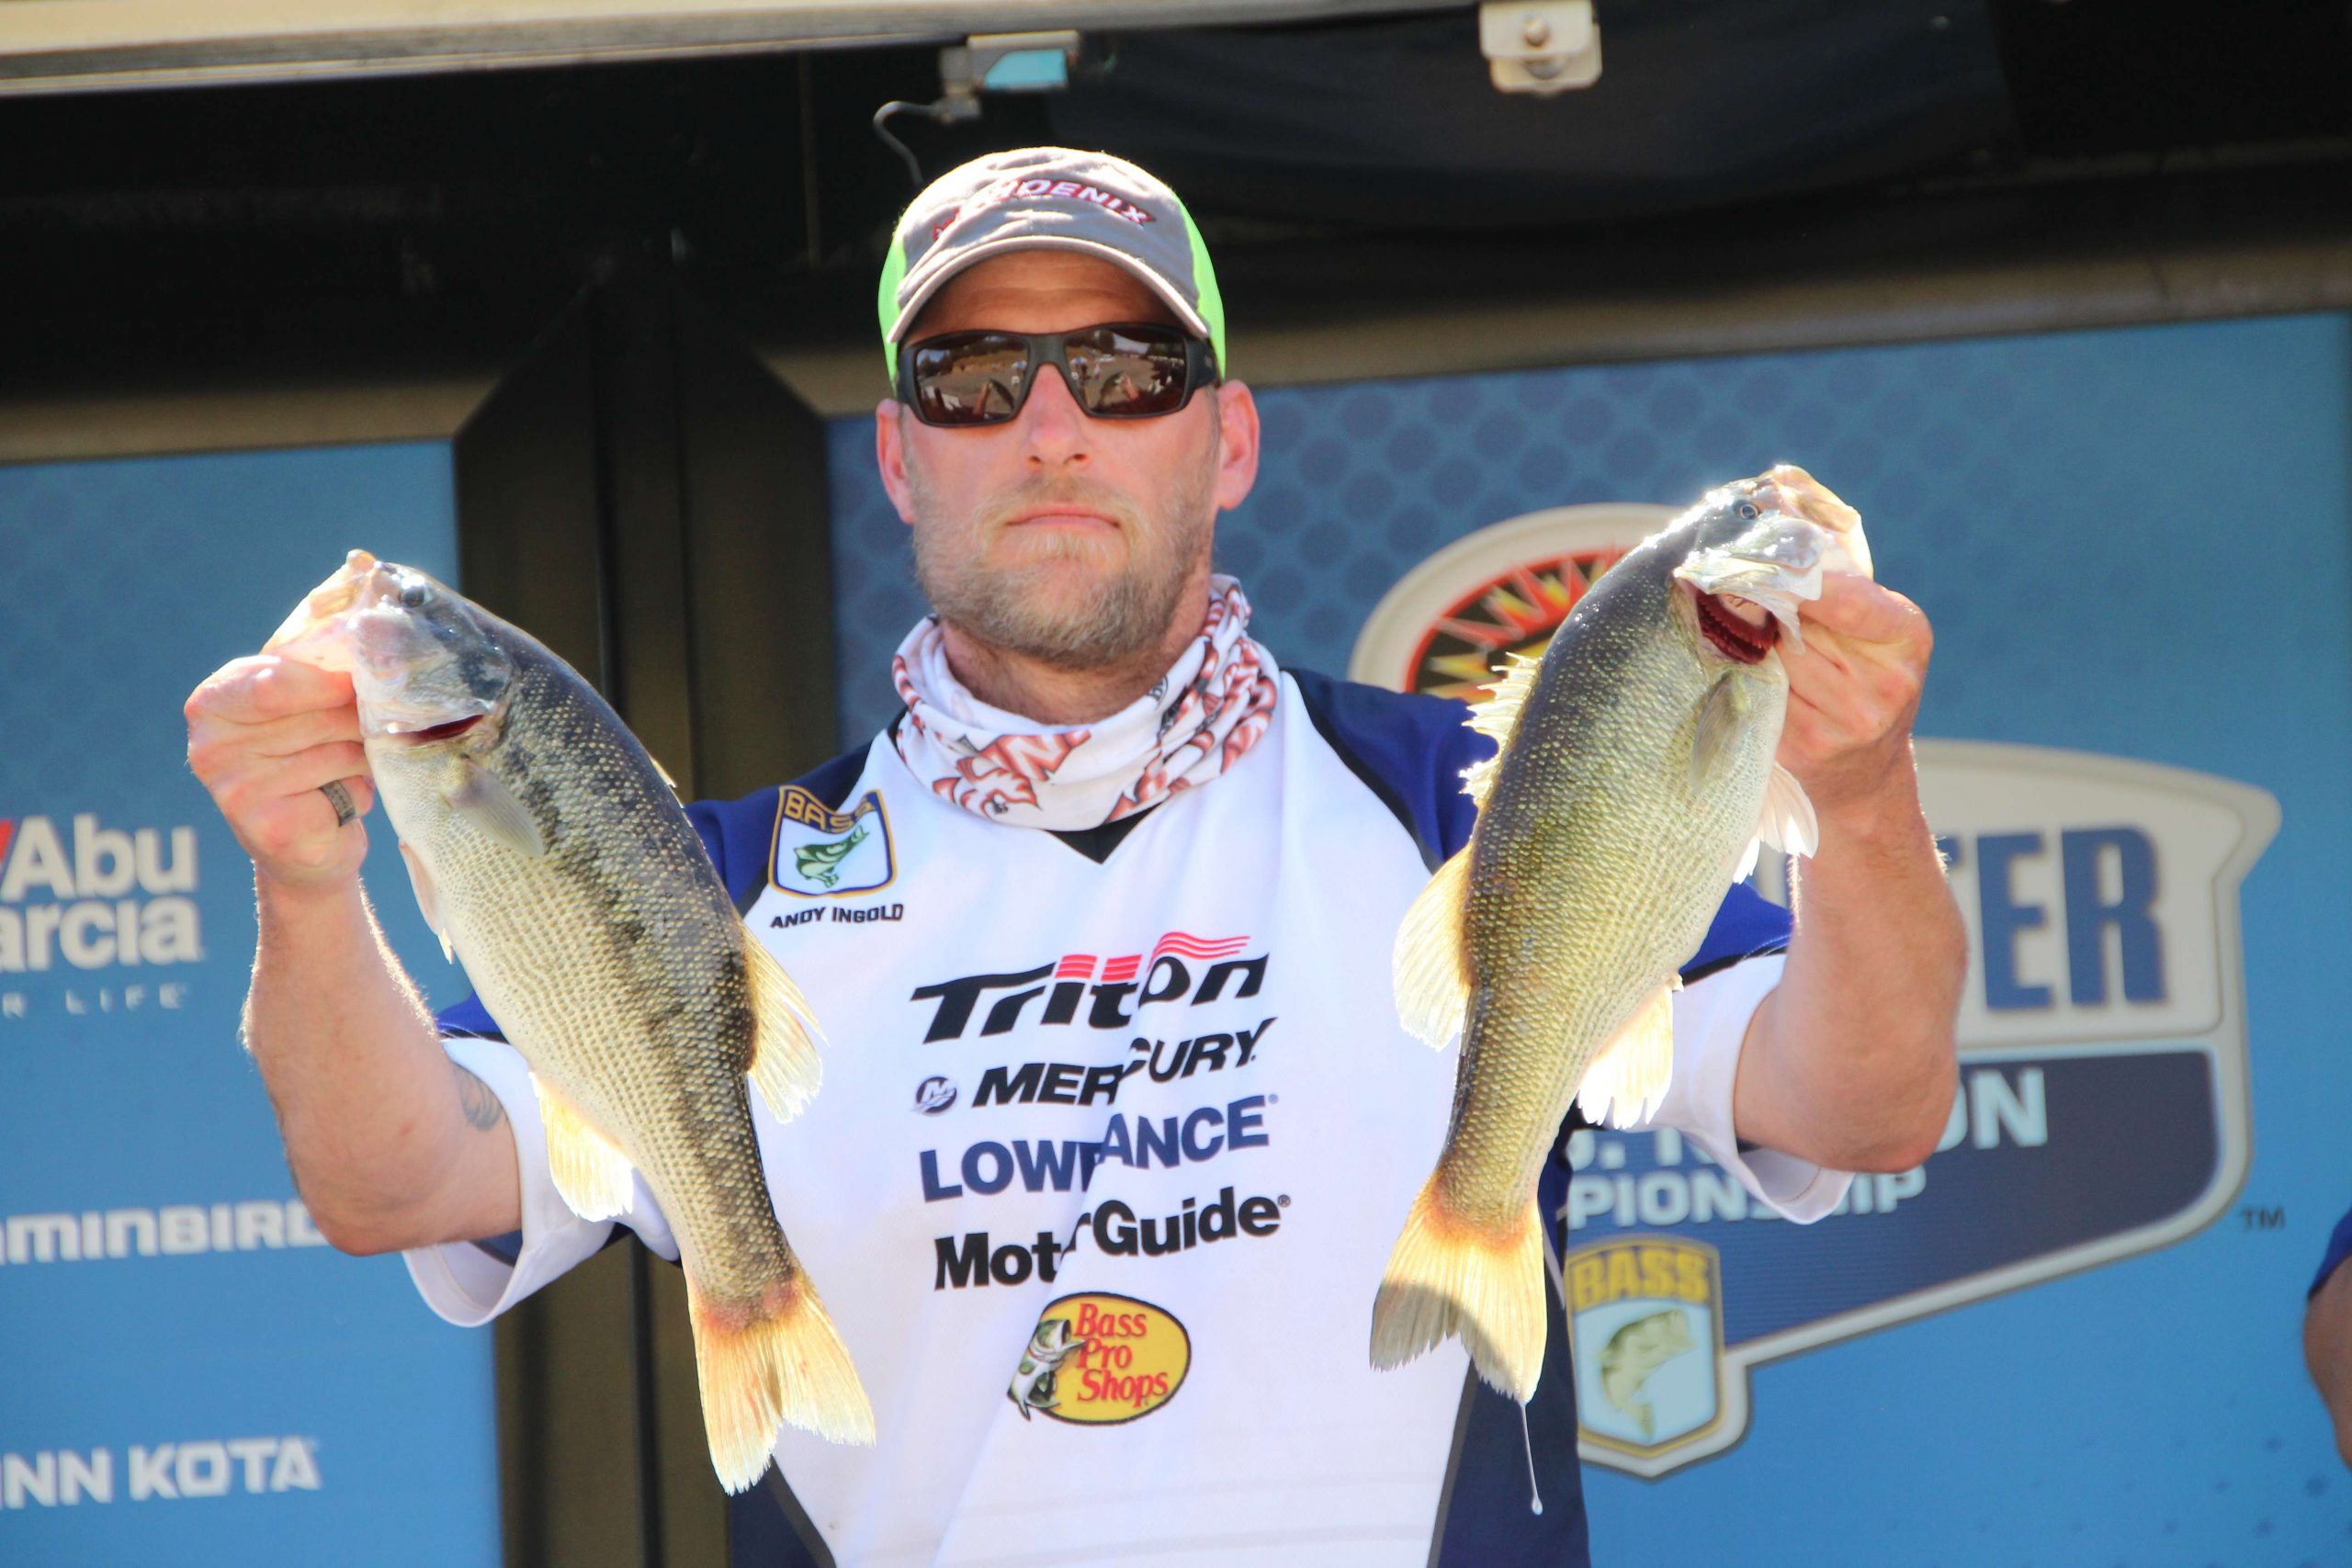 Andy Ingold, co-angler (3rd, 7-3)
